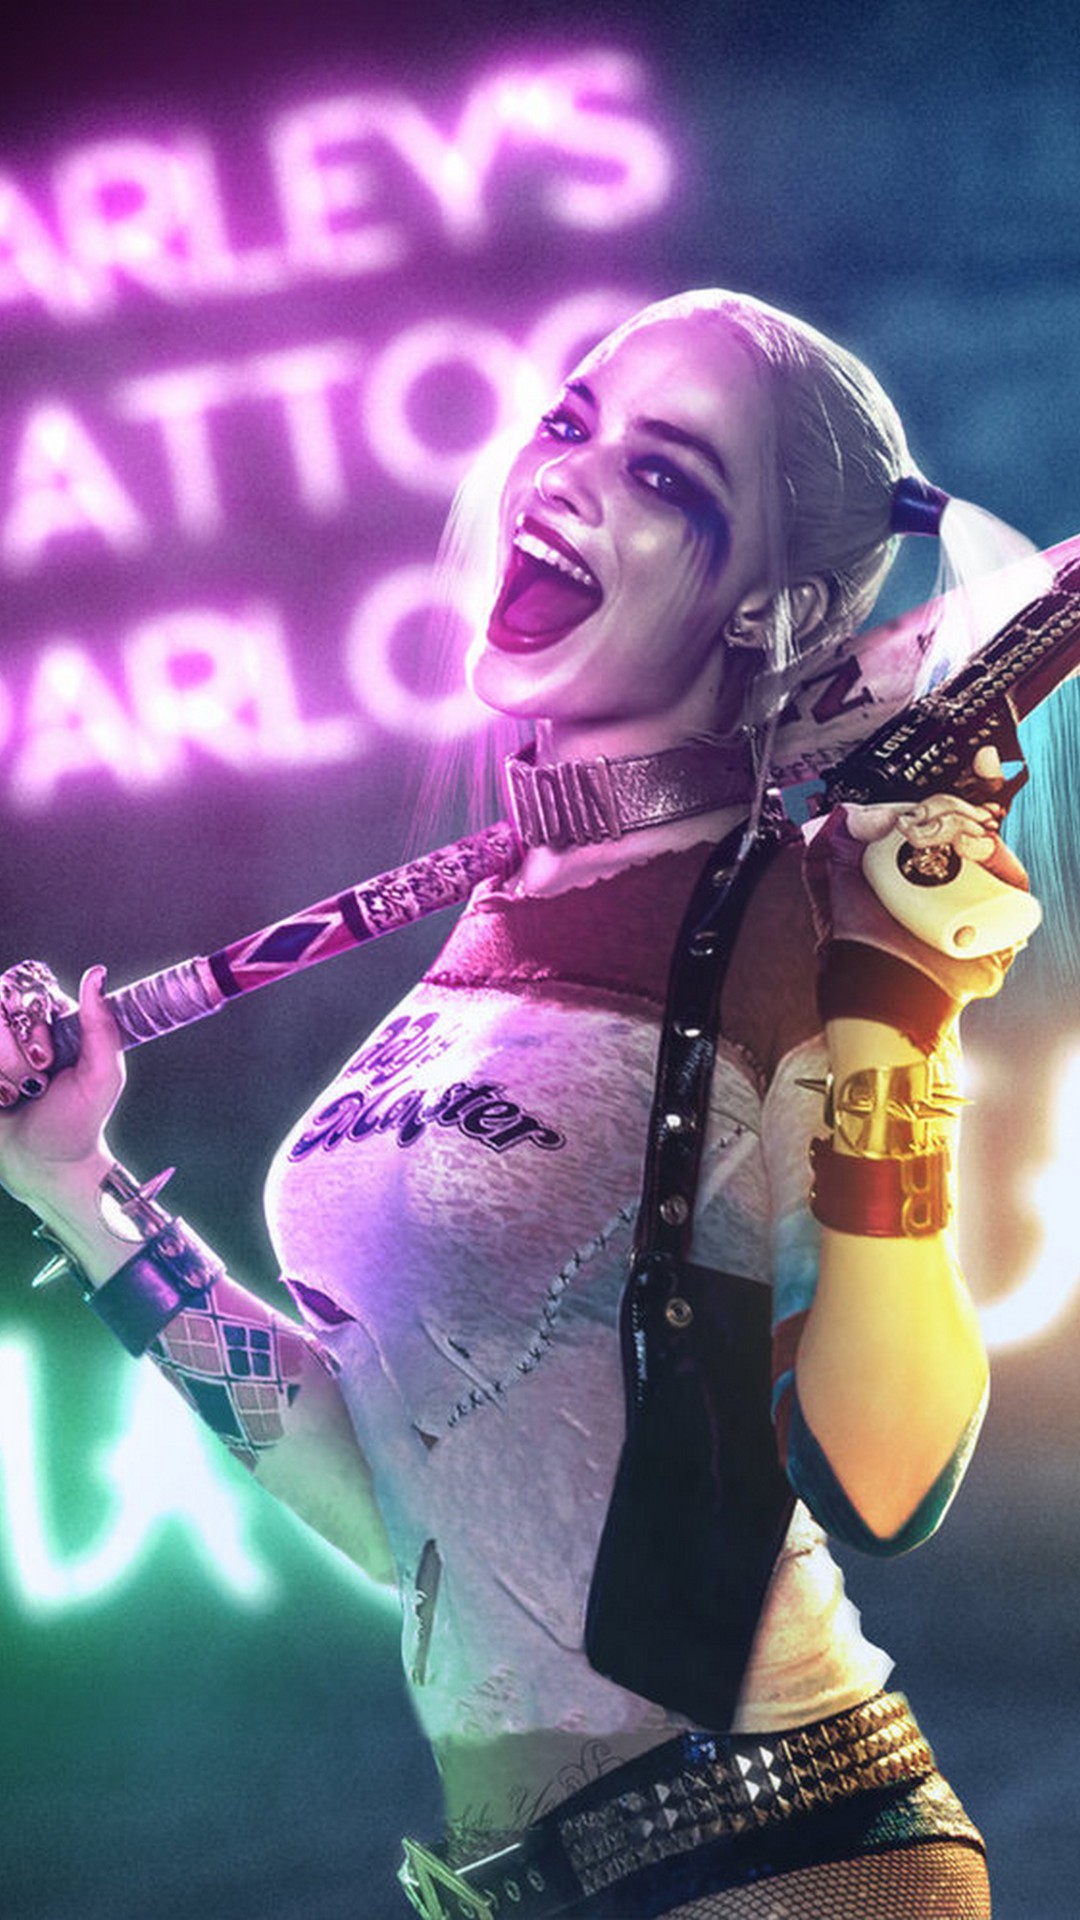 Harley Quinn Movie Wallpaper iPhone with resolution 1080X1920 pixel. You can make this wallpaper for your iPhone 5, 6, 7, 8, X backgrounds, Mobile Screensaver, or iPad Lock Screen